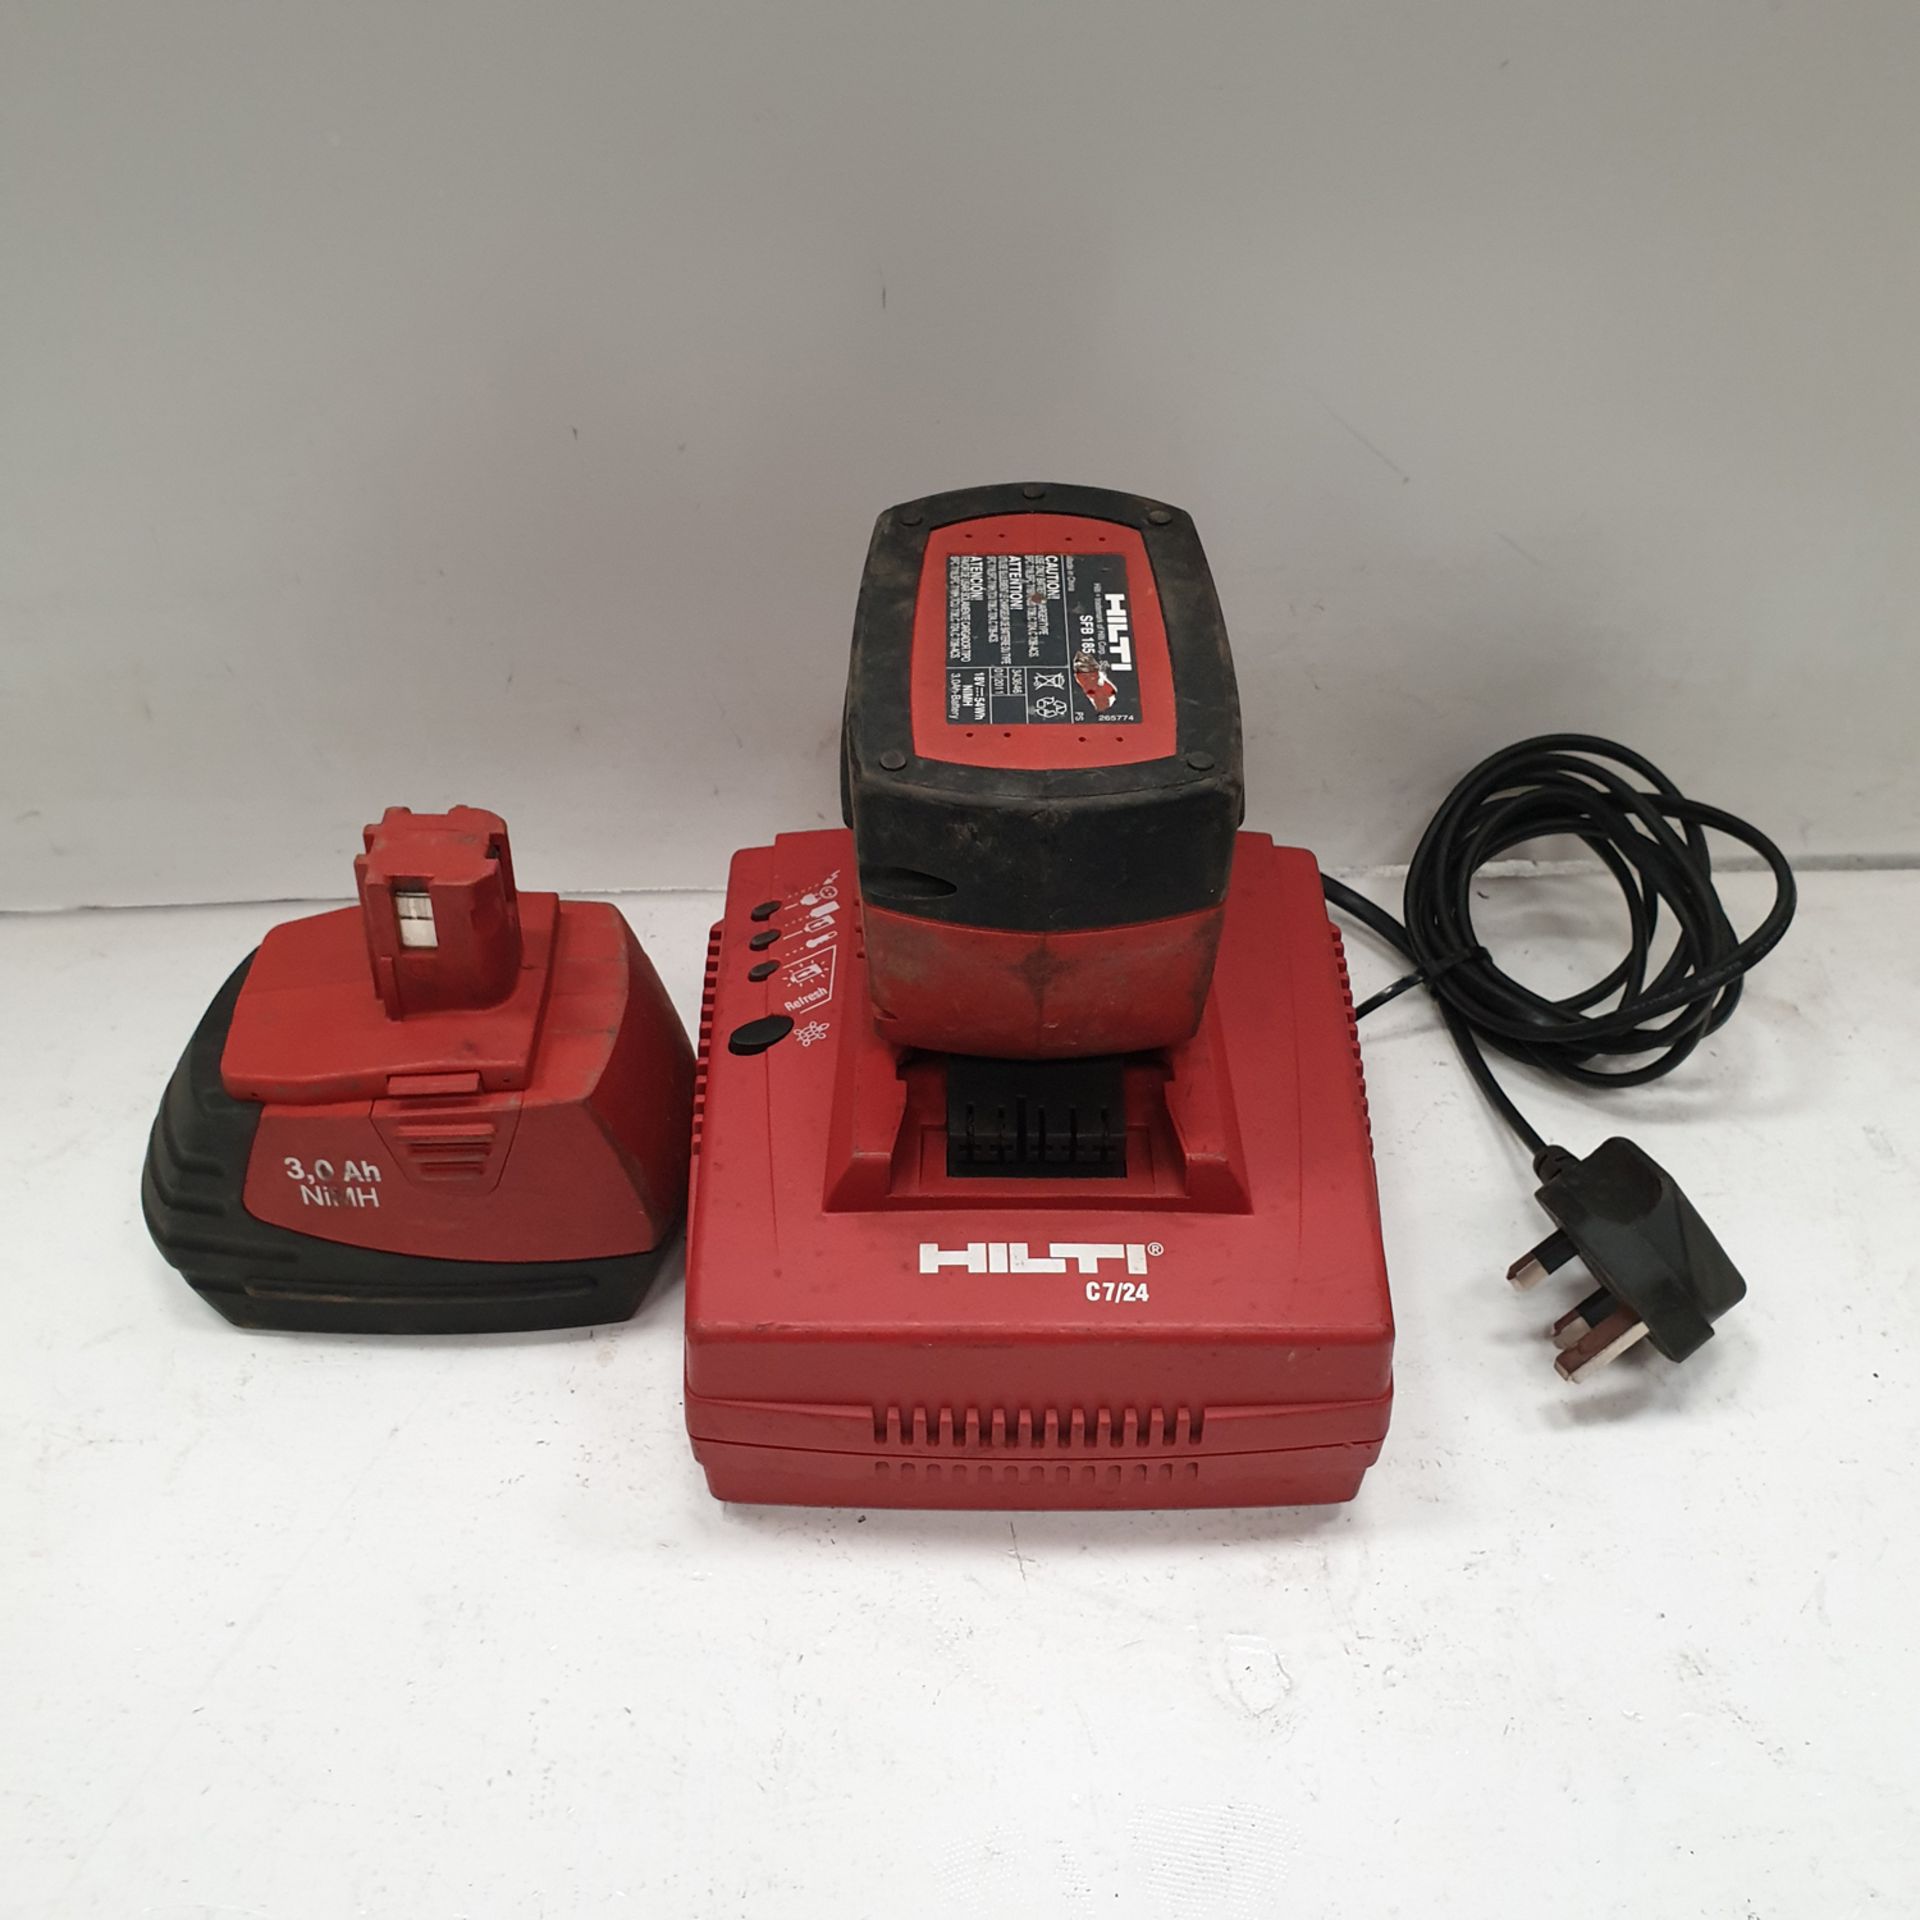 HILTI C7/24 Battery Charger. With 2 Batteries.